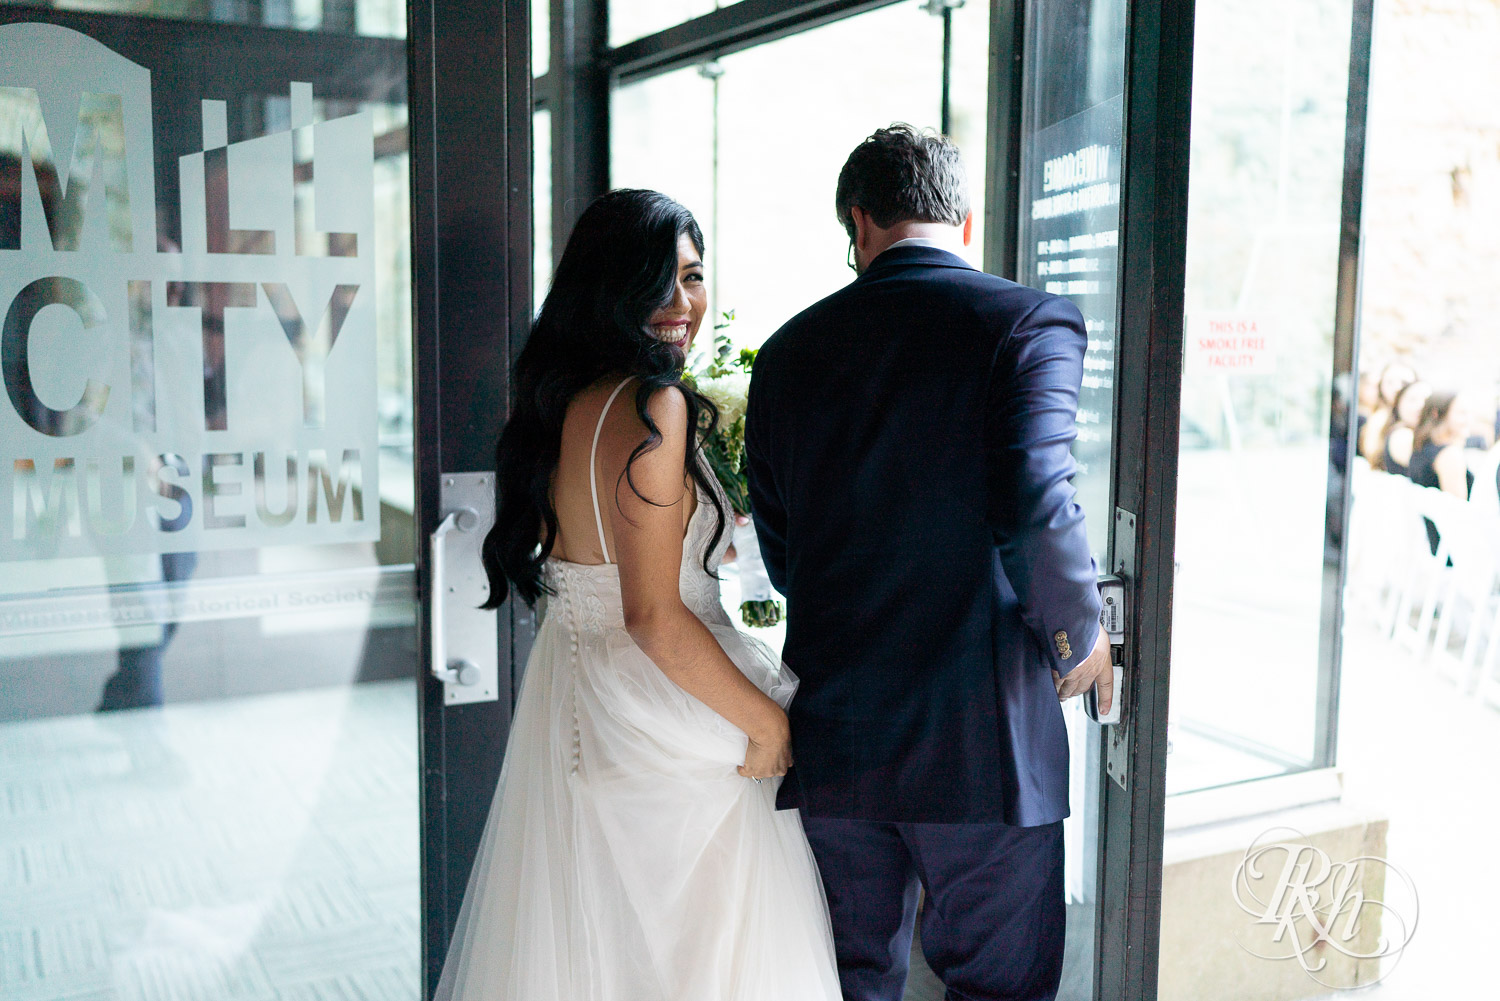 Bride and groom walking down alter after wedding ceremony at Mill City Museum in Minneapolis, Minnesota